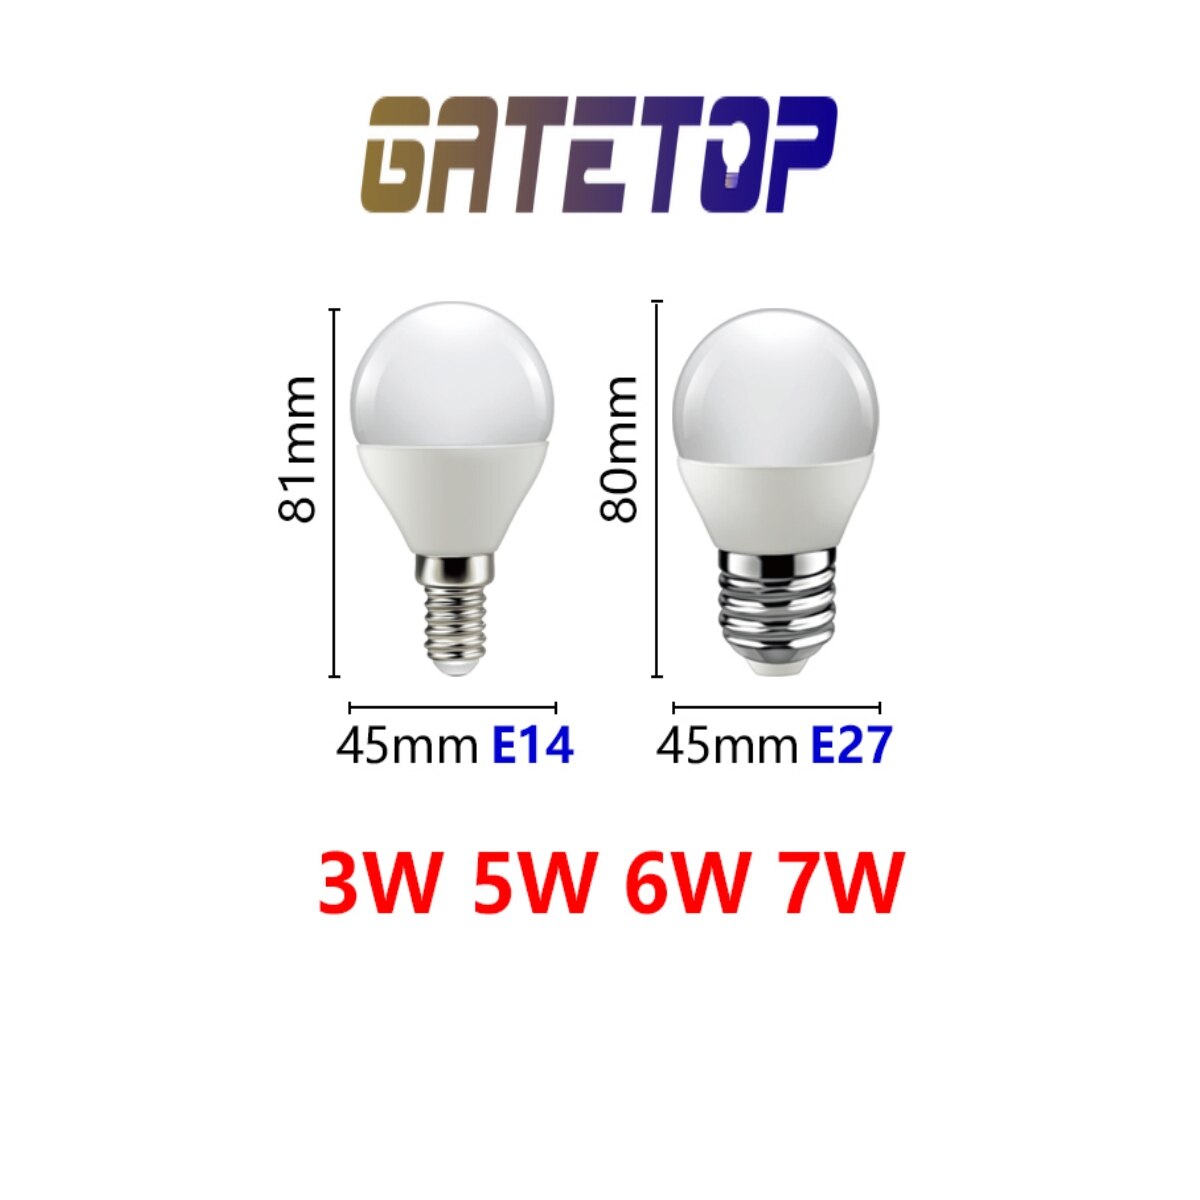 2-10PCS Led  Bulb G45 3W 5W 6W 7W E14 E27 220V 3000K 4000K 6000k Lamp Light Suitable for kitchen, living room, office hotel